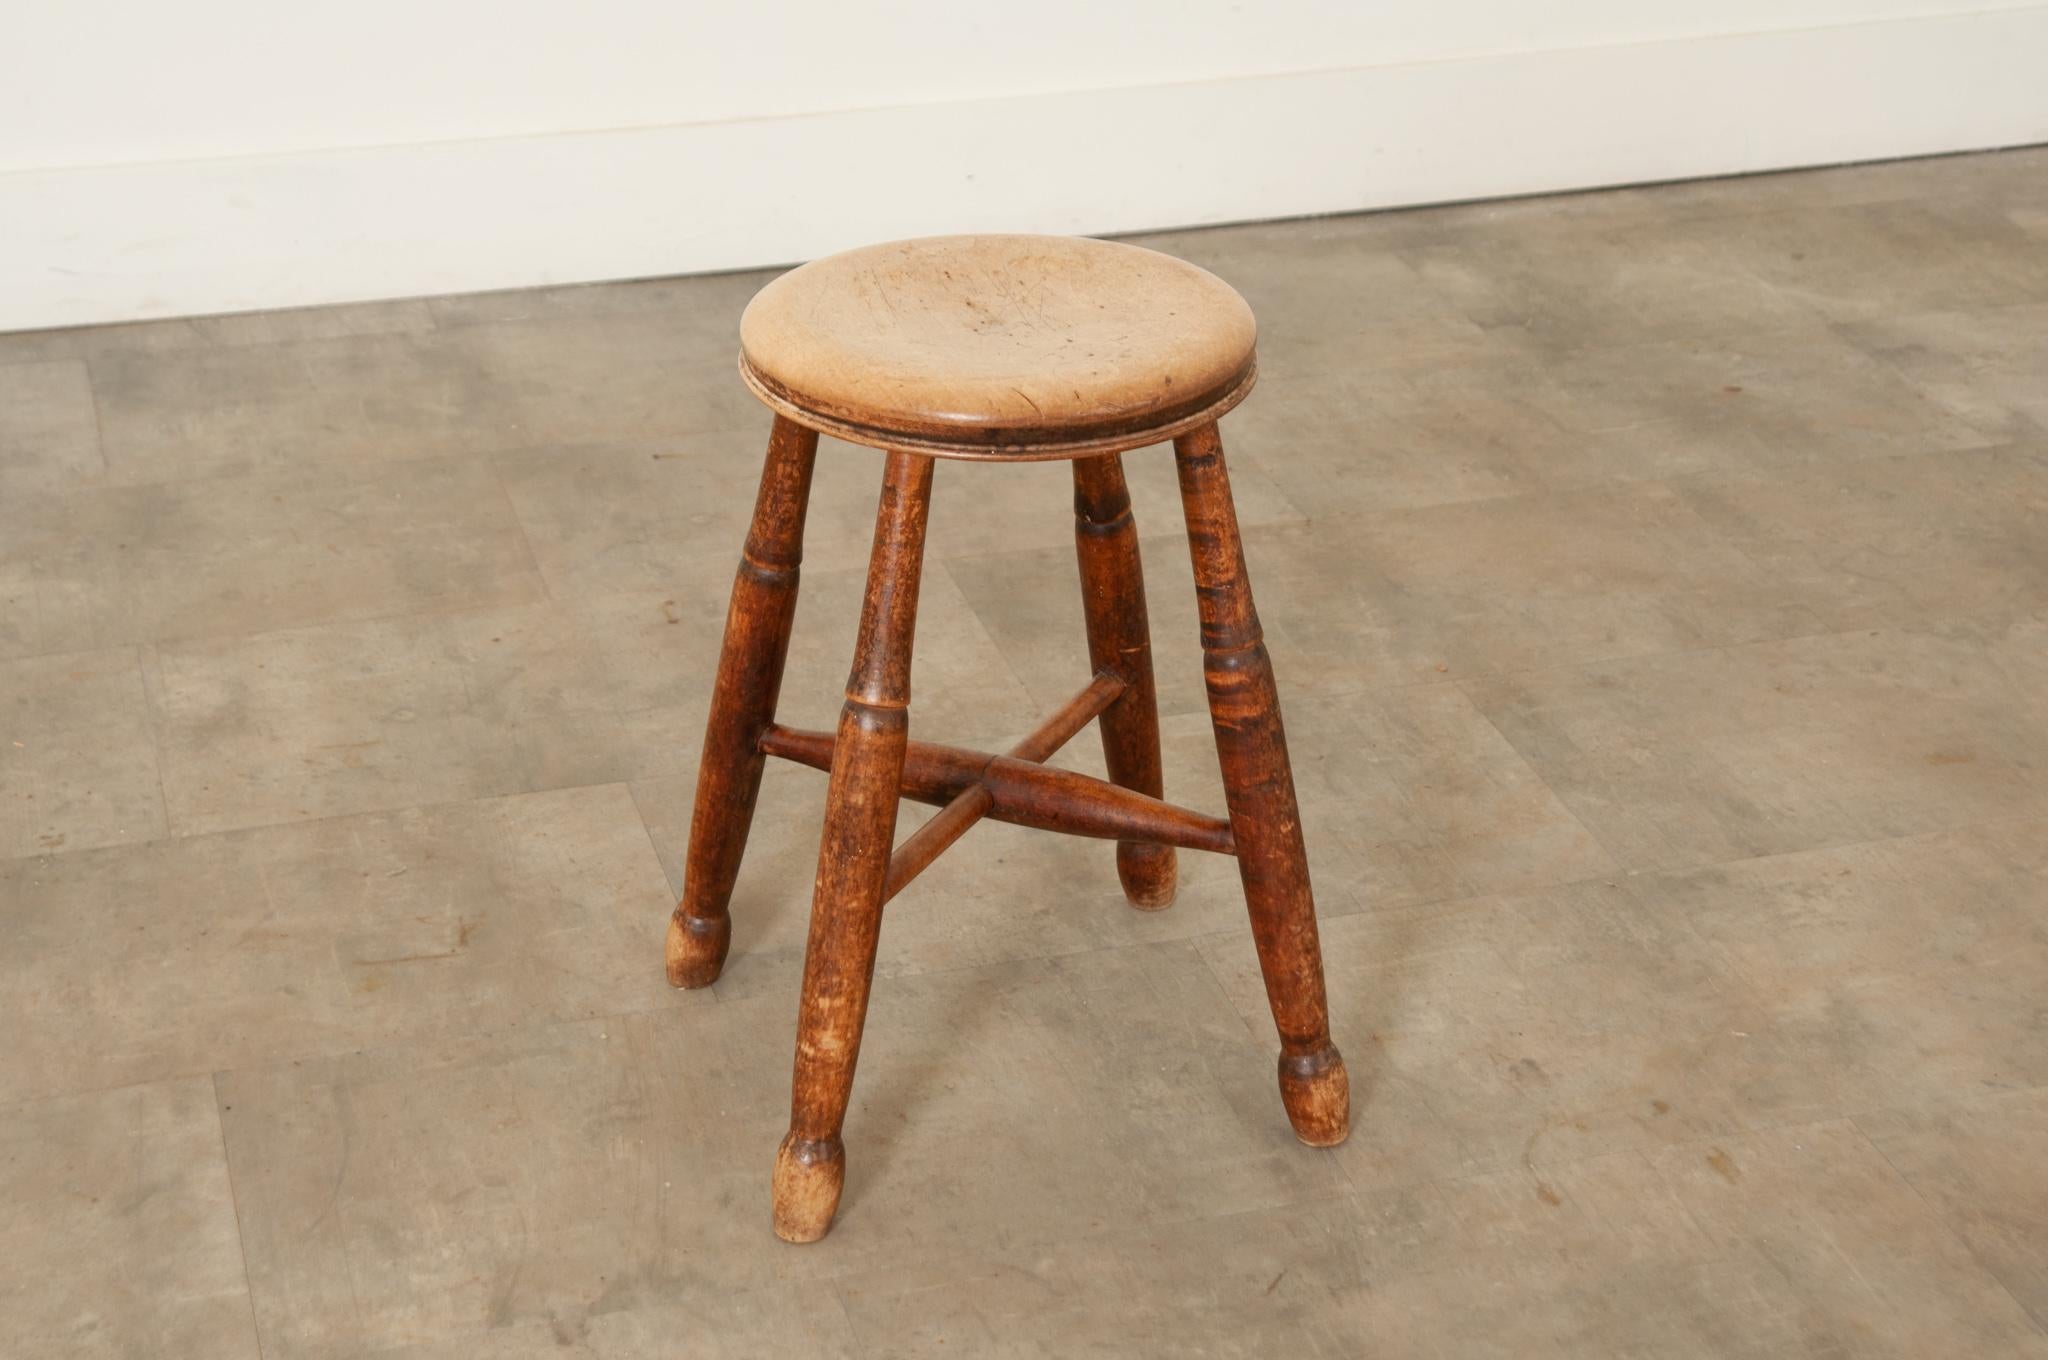 A Victorian English farmhouse stool handcrafted in oak in England circa 1840 featuring a smooth molded and trimmed round seat with comfortable recessed center atop four banded and turned splayed legs joined with a sturdy turned stretcher for extra